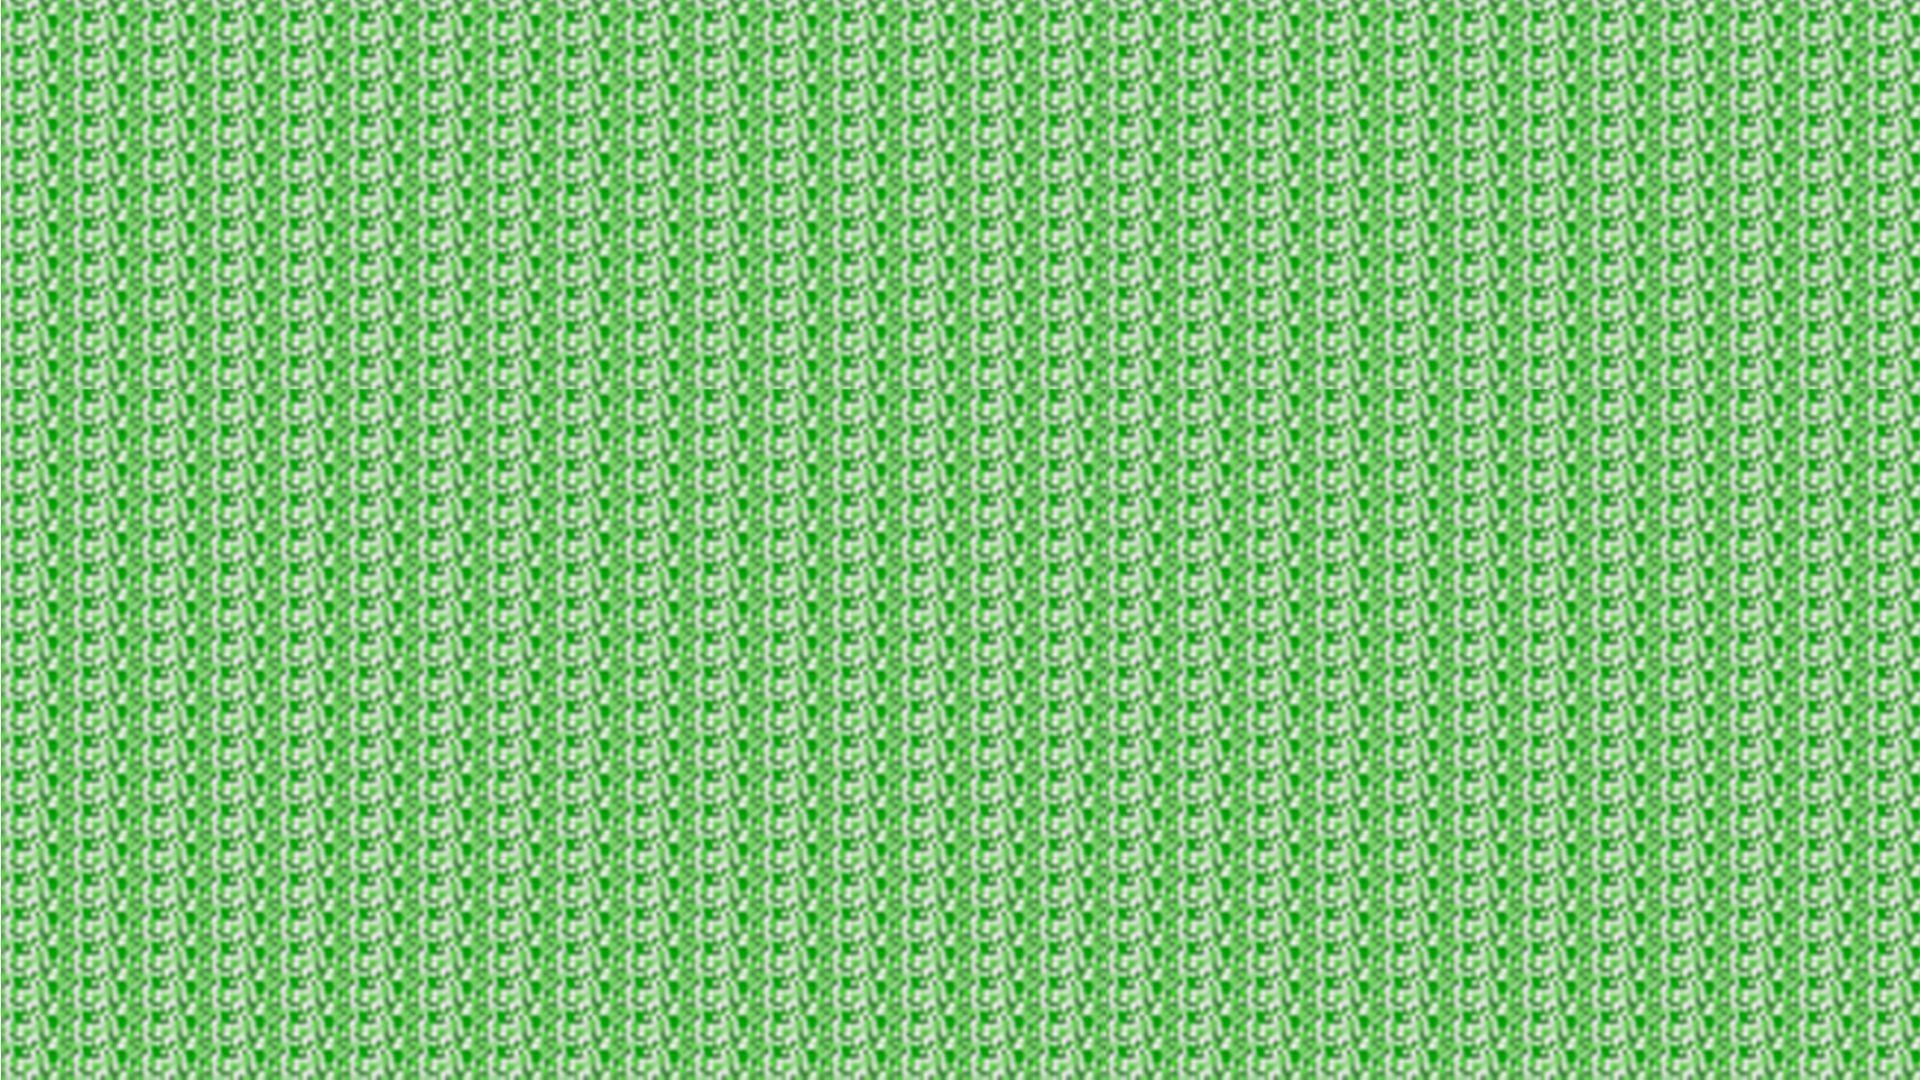 1920x1080  Minecraft Creeper Wallpaper Ideas For The House Creepers